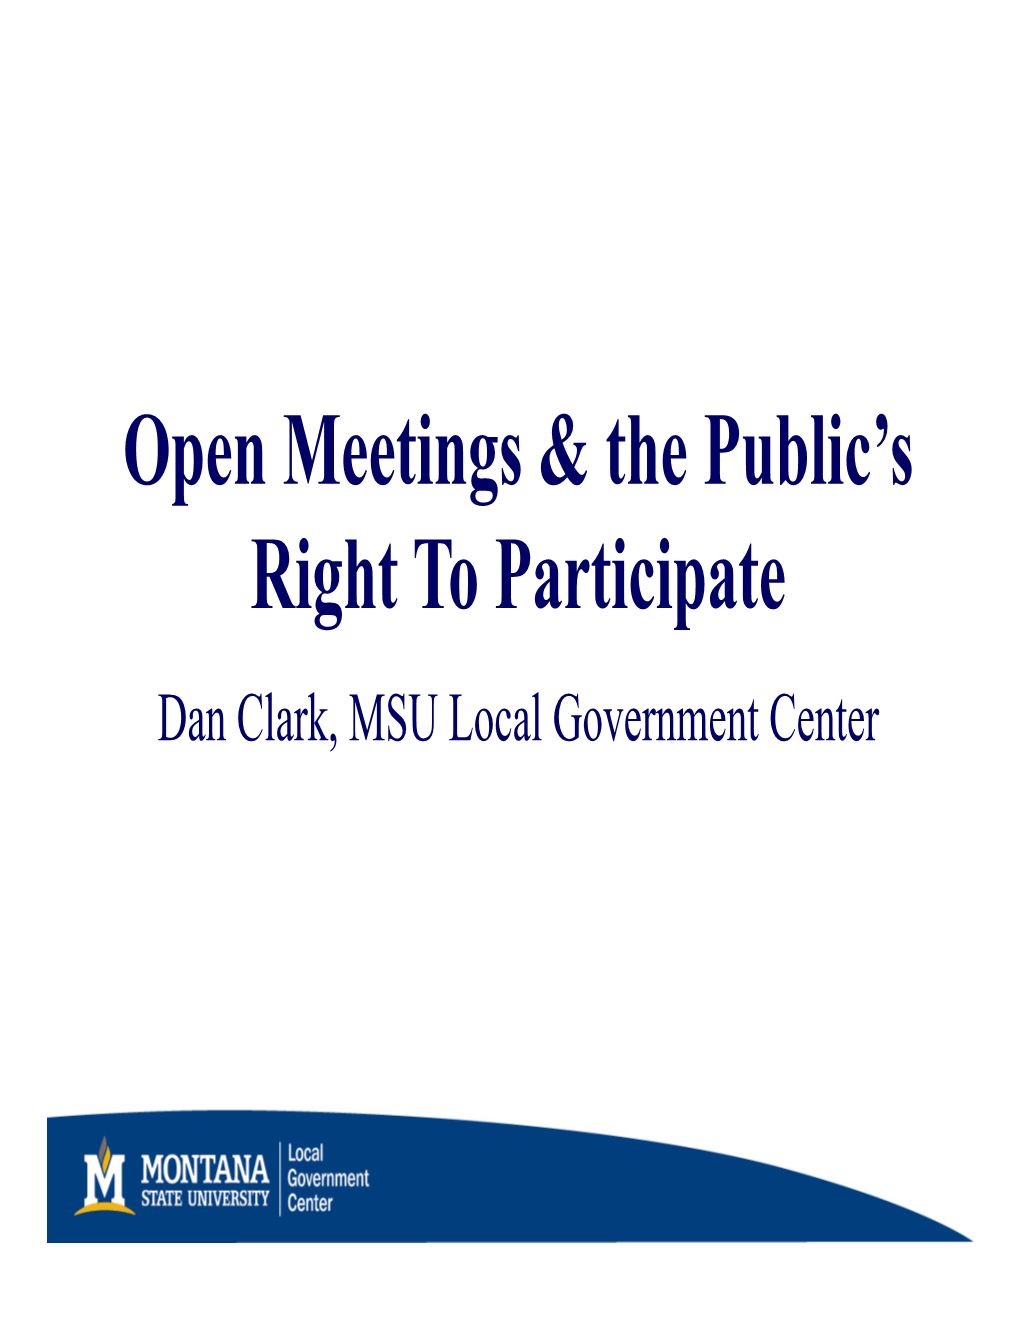 Open Meetings & the Public's Right to Participate